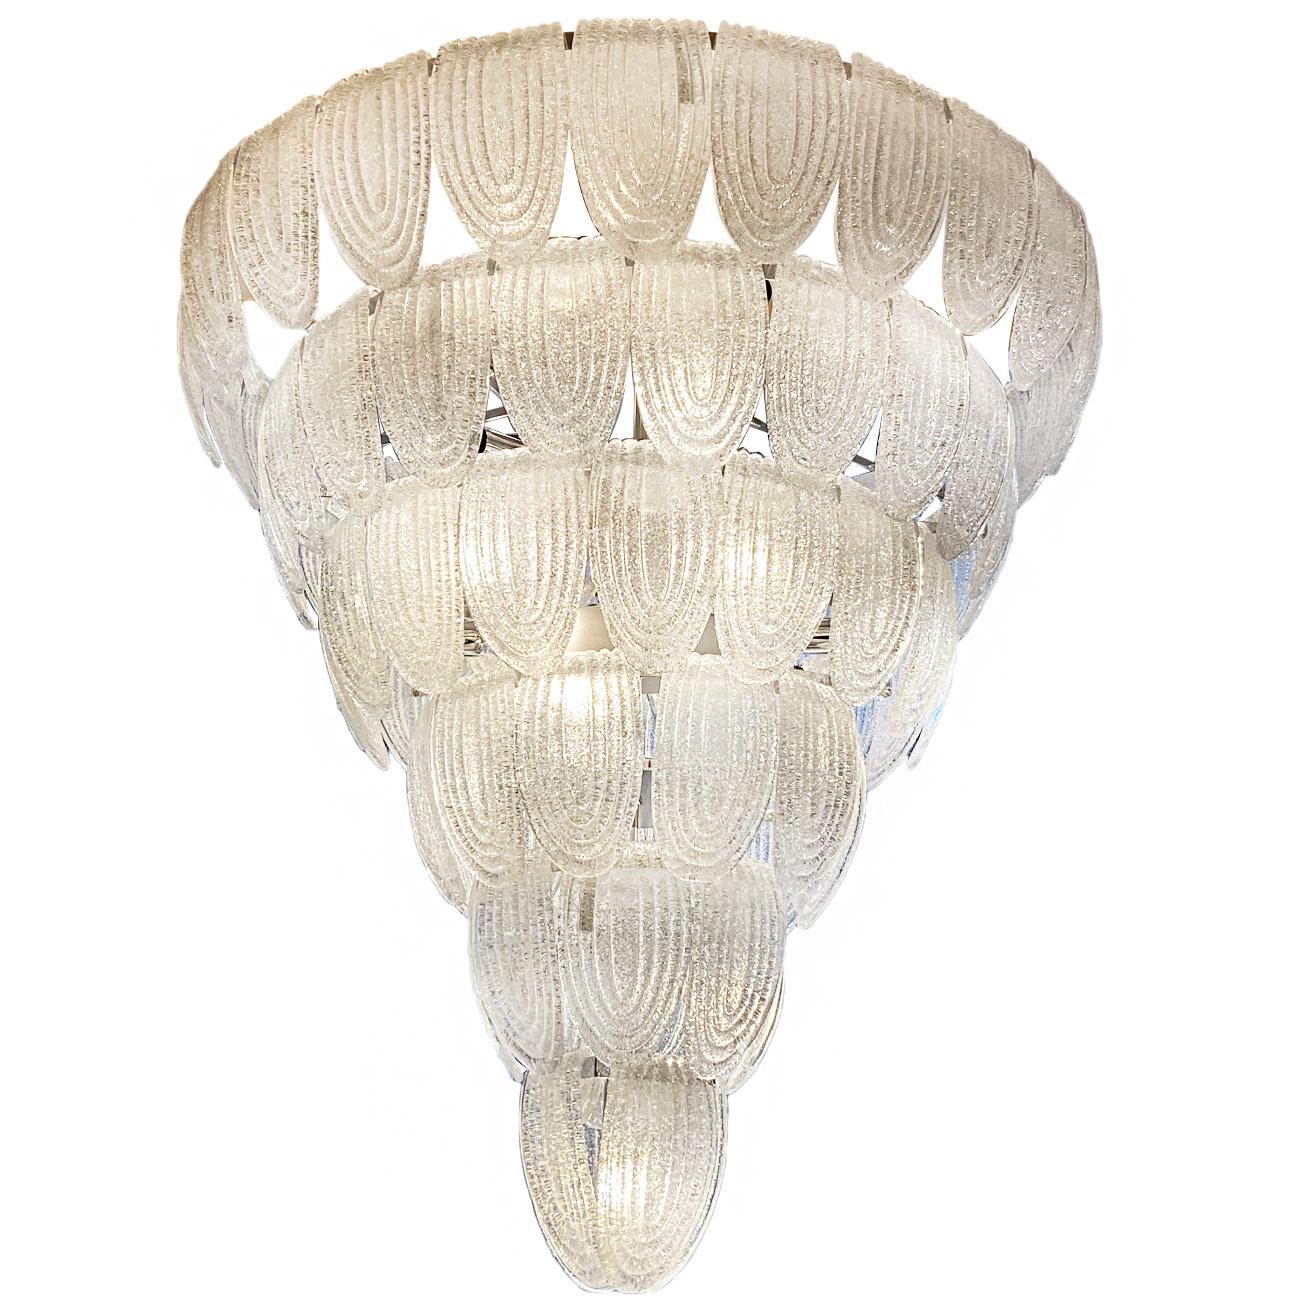 A pair of large circa 1960s Italian molded glass light fixtures with interior lights and nickel-plated body. Sold individually.

Measurements:
Diameter: 40